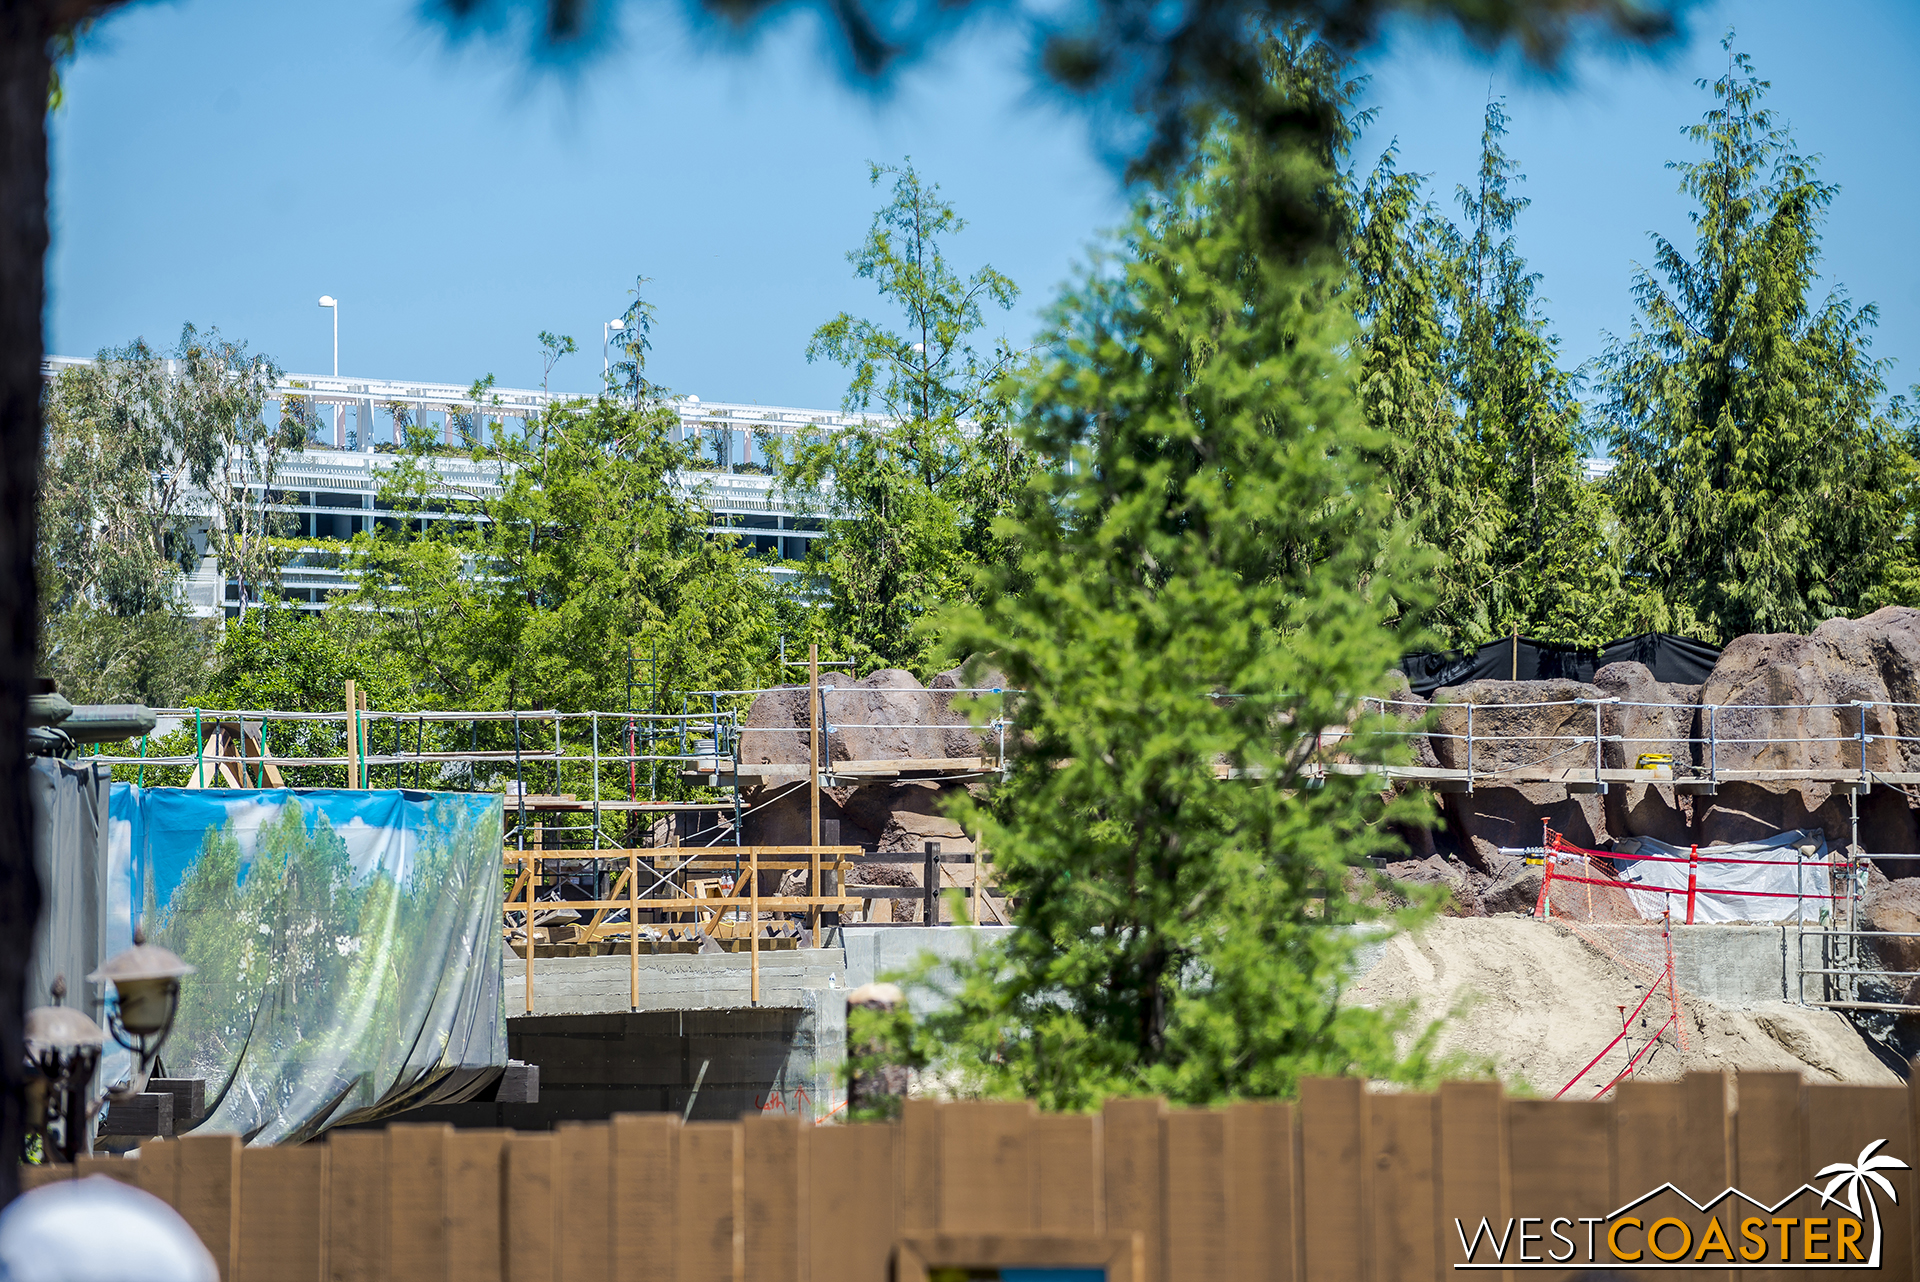  The concrete just beside the tarp on the left is part of the bridge over the tunneled entrance that will lead guests walking along the Rivers of America waterfront beside the Hungry Bear Restaurant into the future "Star Oars" Land. 